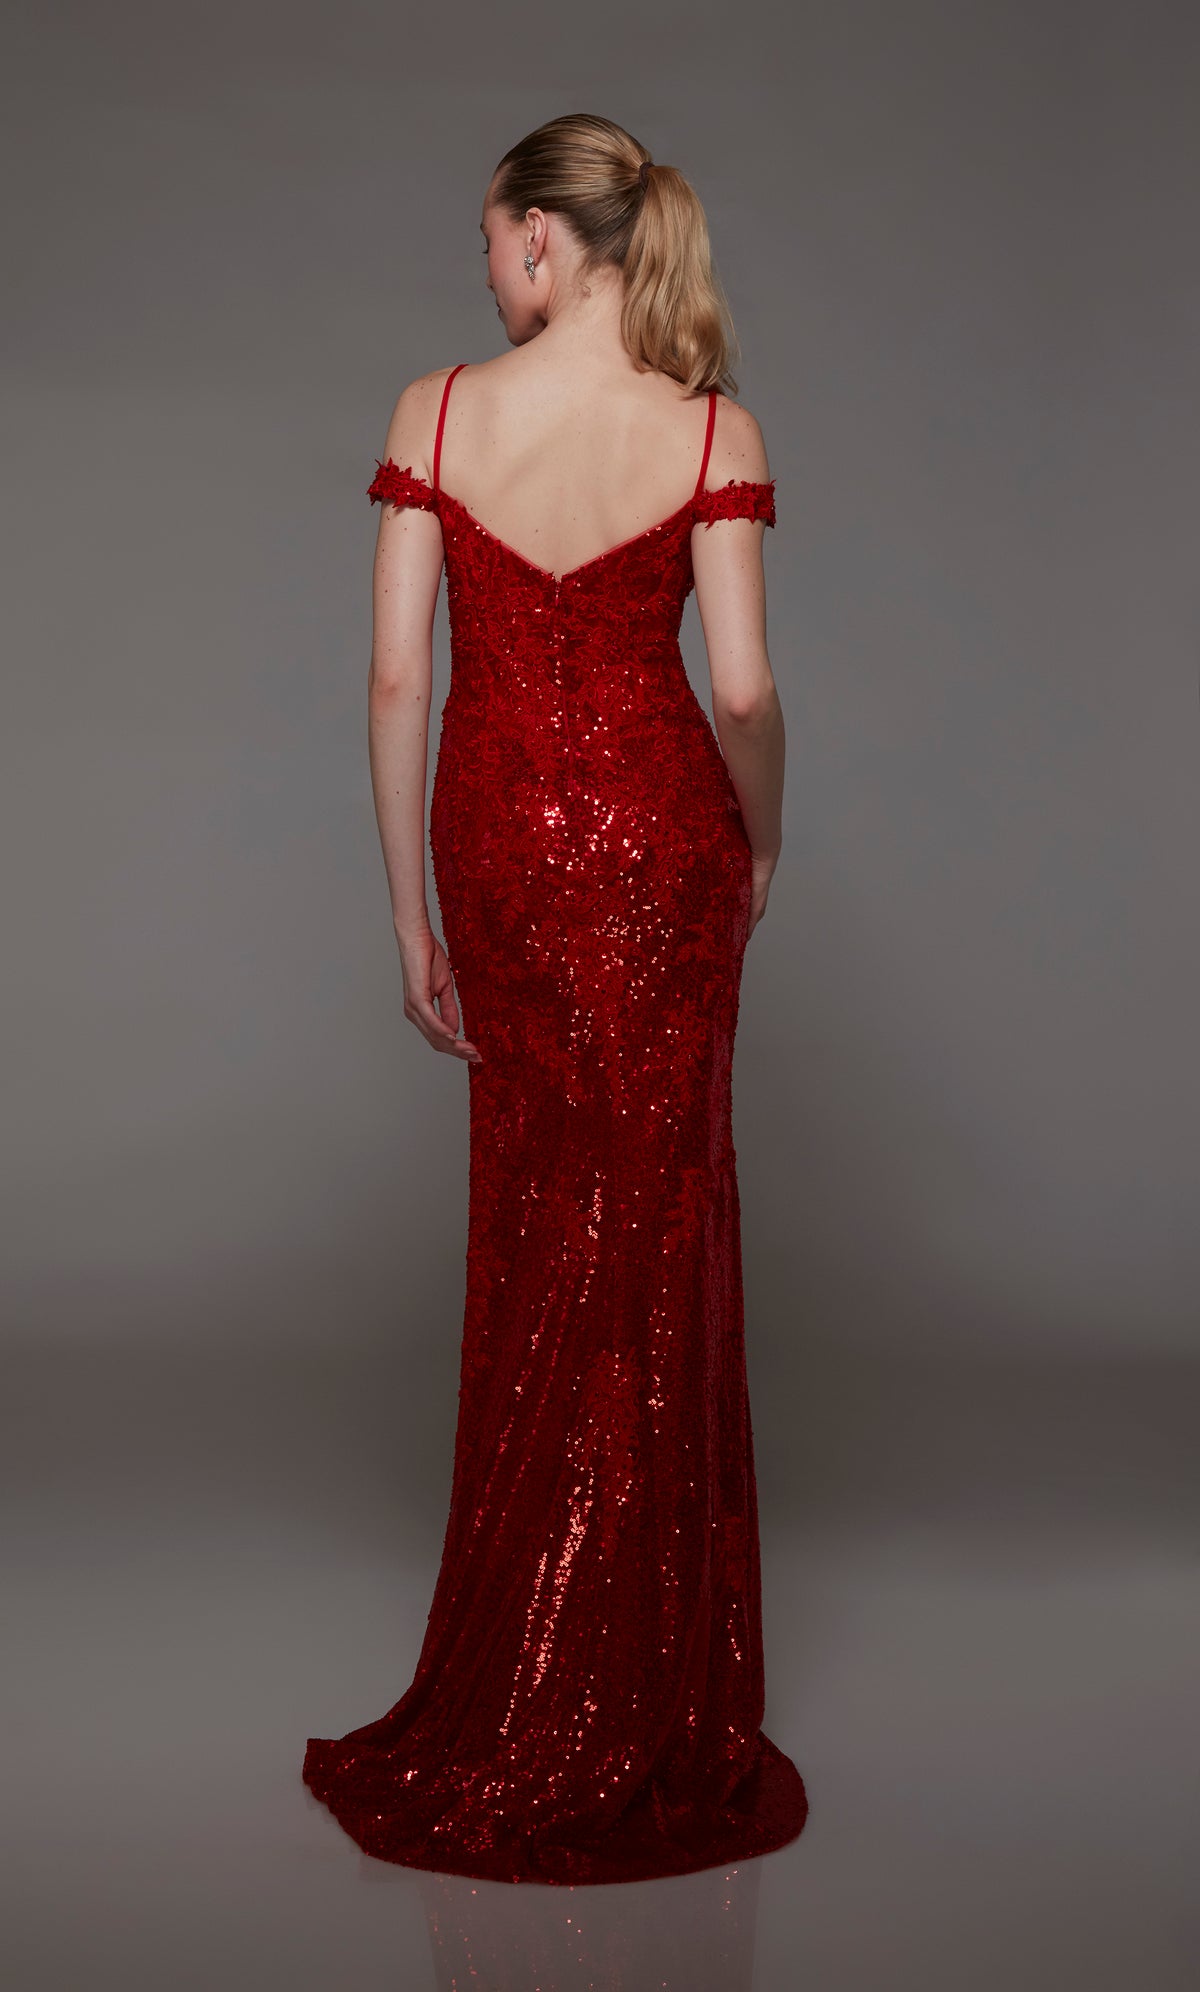 Fiery red prom dress: fitted, sparkly, daring slit, off-shoulder neckline, zip back, slight train. Perfect for an glamorous night out!